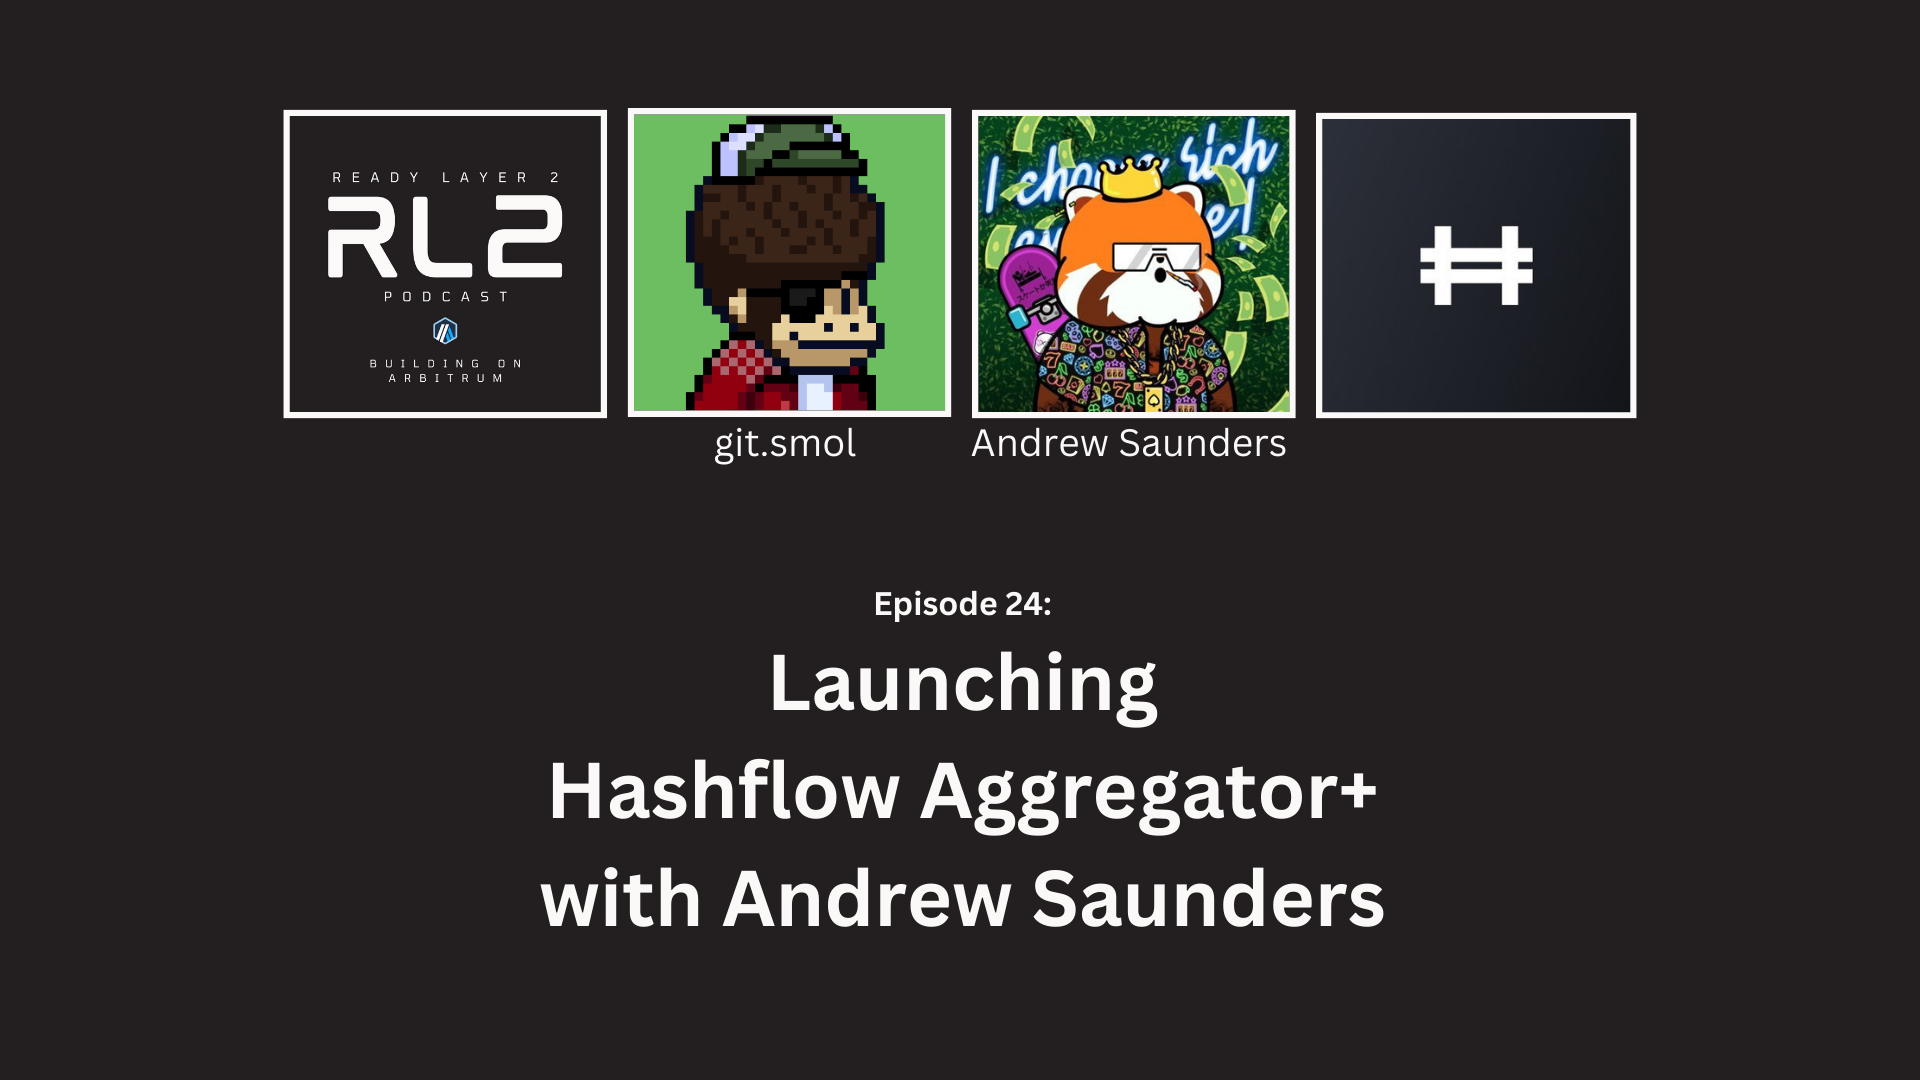 Andrew Saunders and Aggregator+ on Ready Layer 2 Podcast